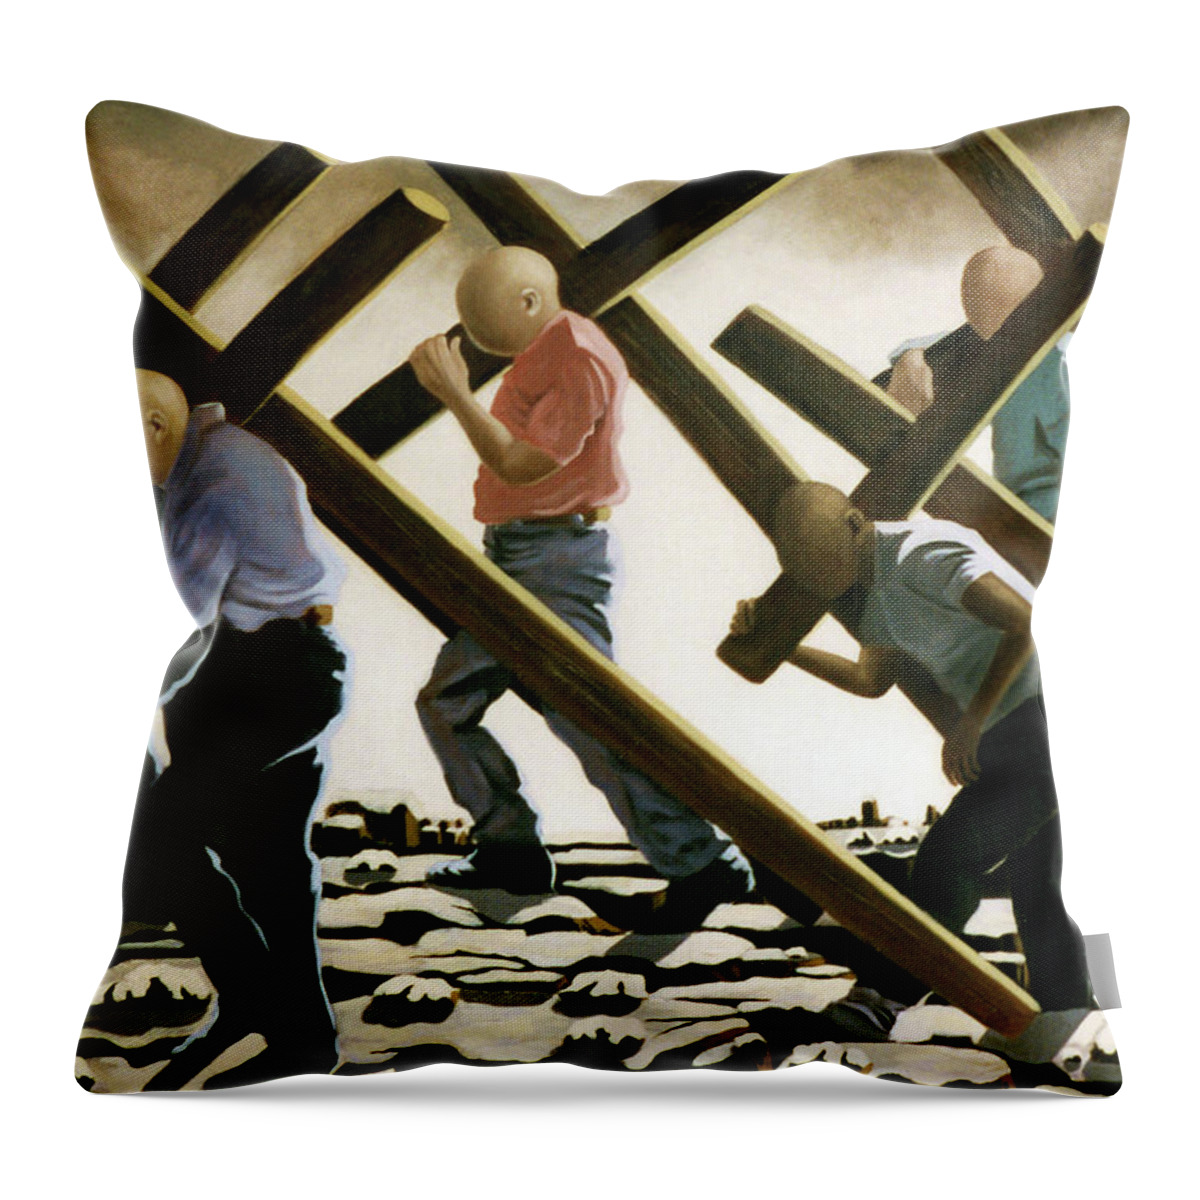 Surreal Throw Pillow featuring the painting The Walk by Anthony Falbo